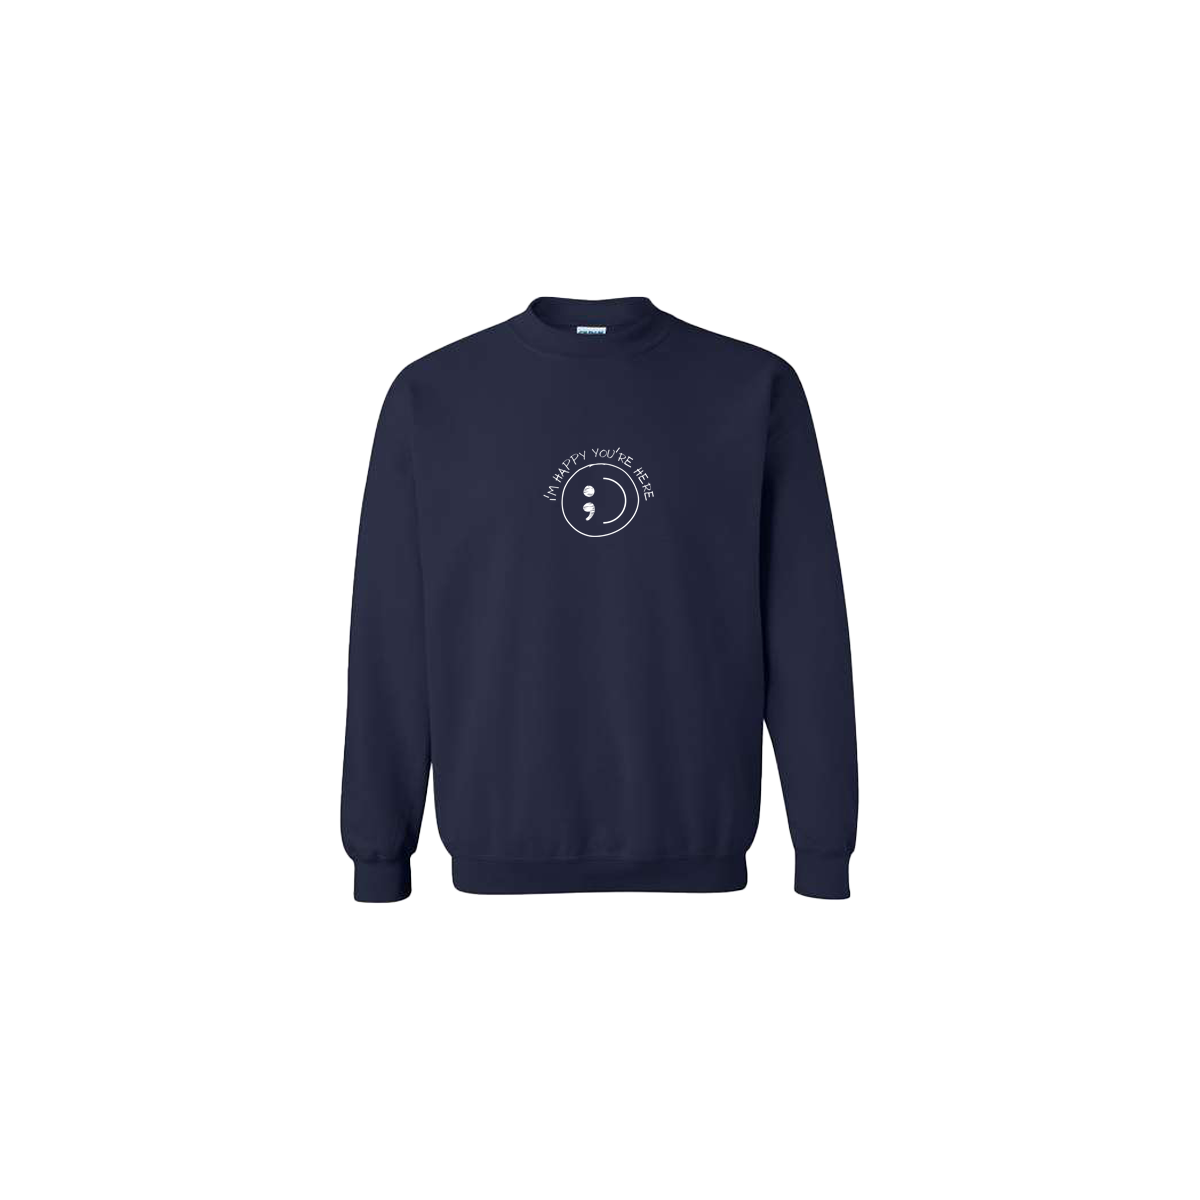 I'm Happy You're Here Embroidered Navy Blue Crewneck - Mental Health Awareness Clothing